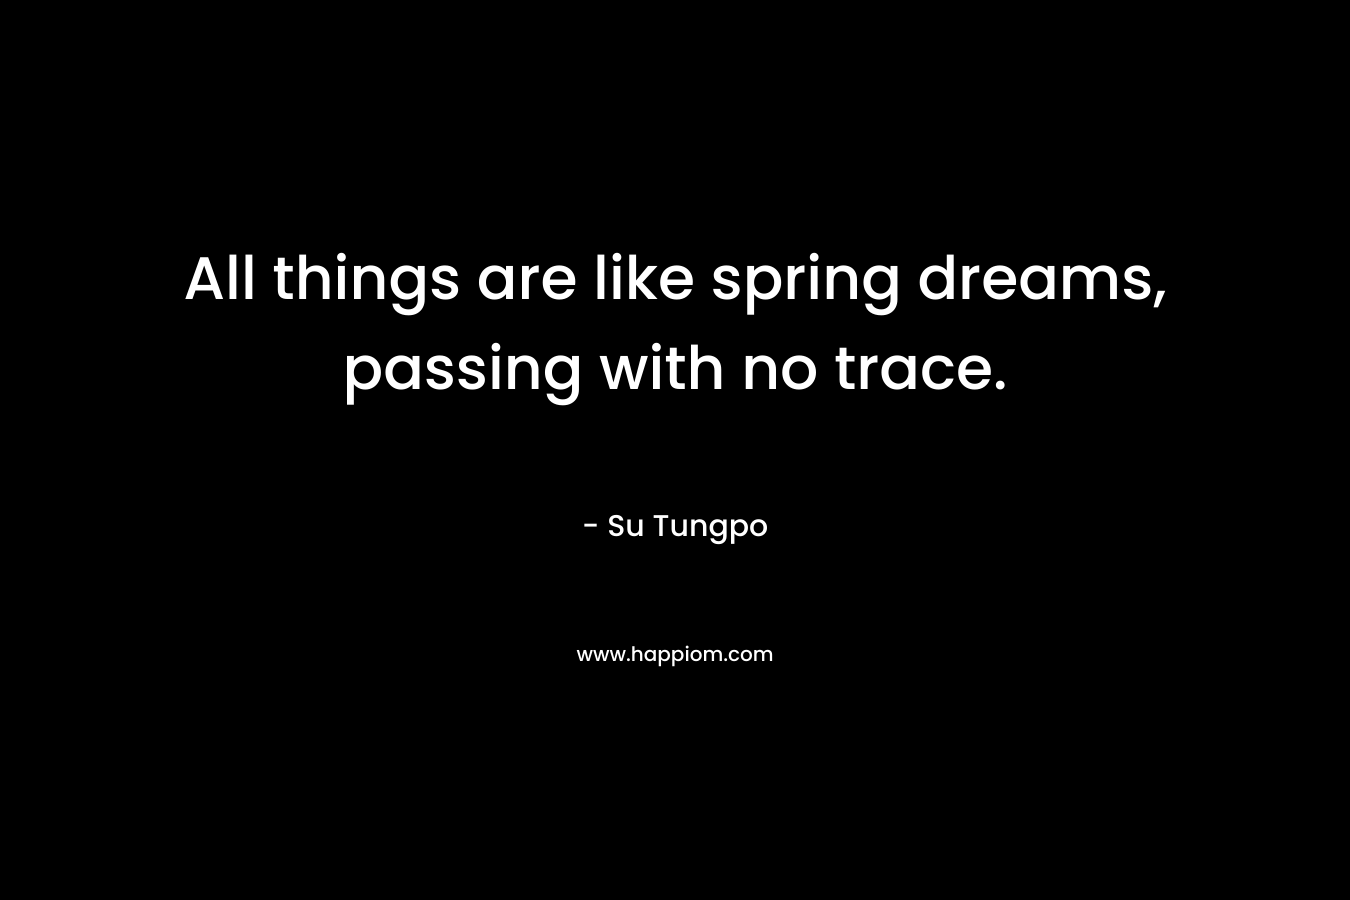 All things are like spring dreams, passing with no trace.